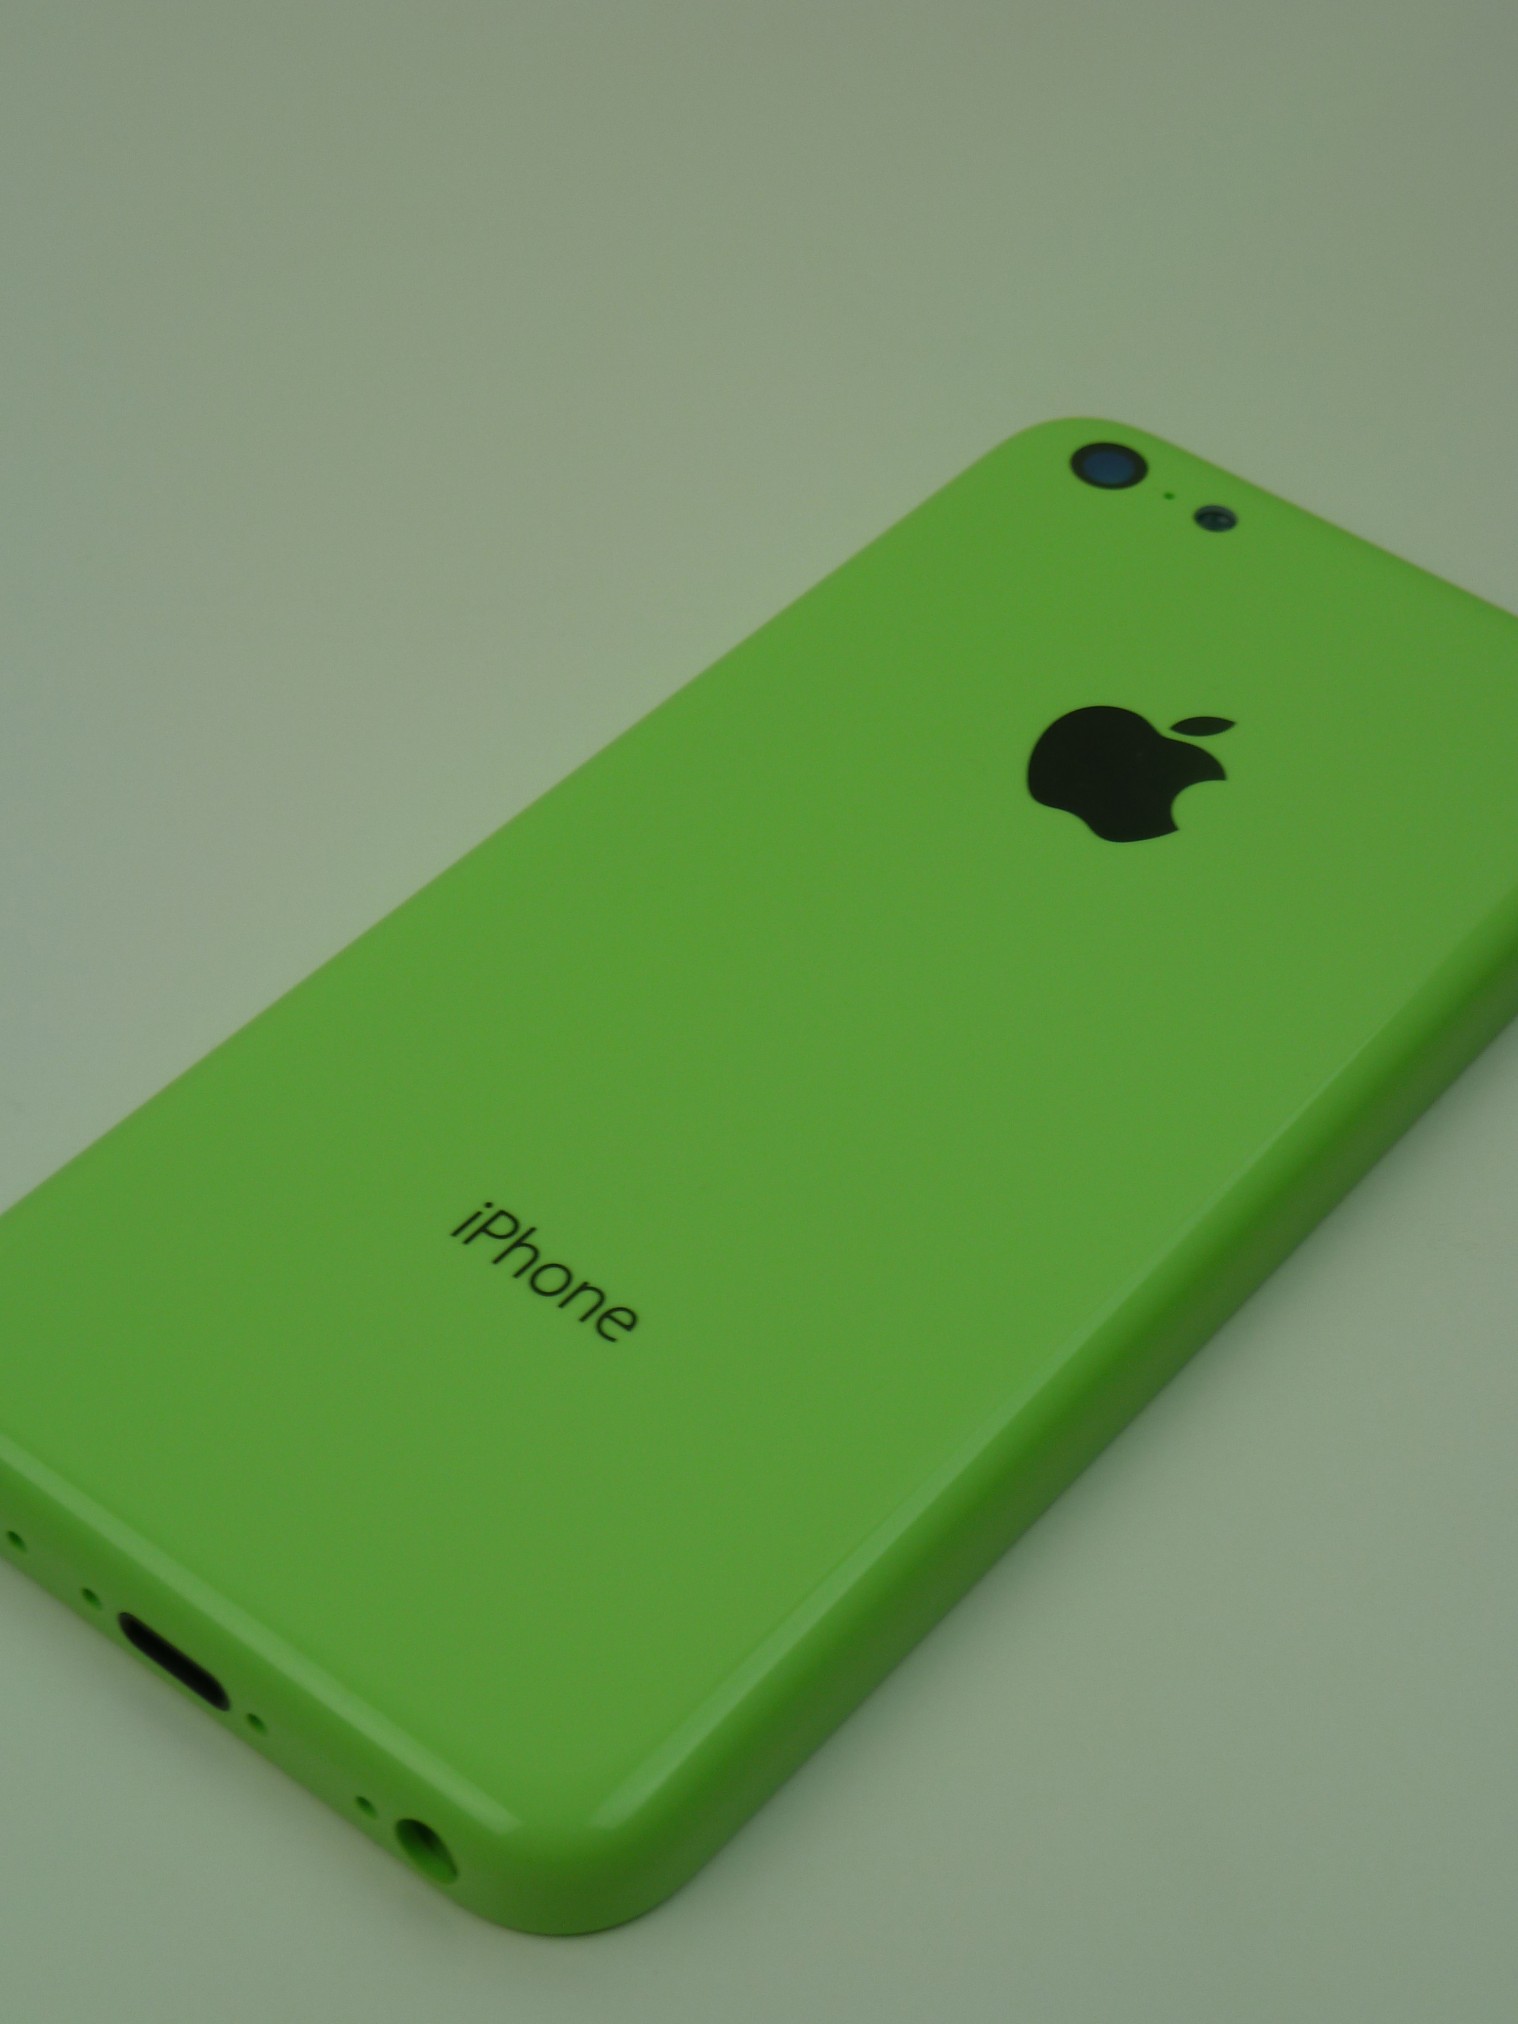 iphone-5c-green-color-12 - GSM Reviews